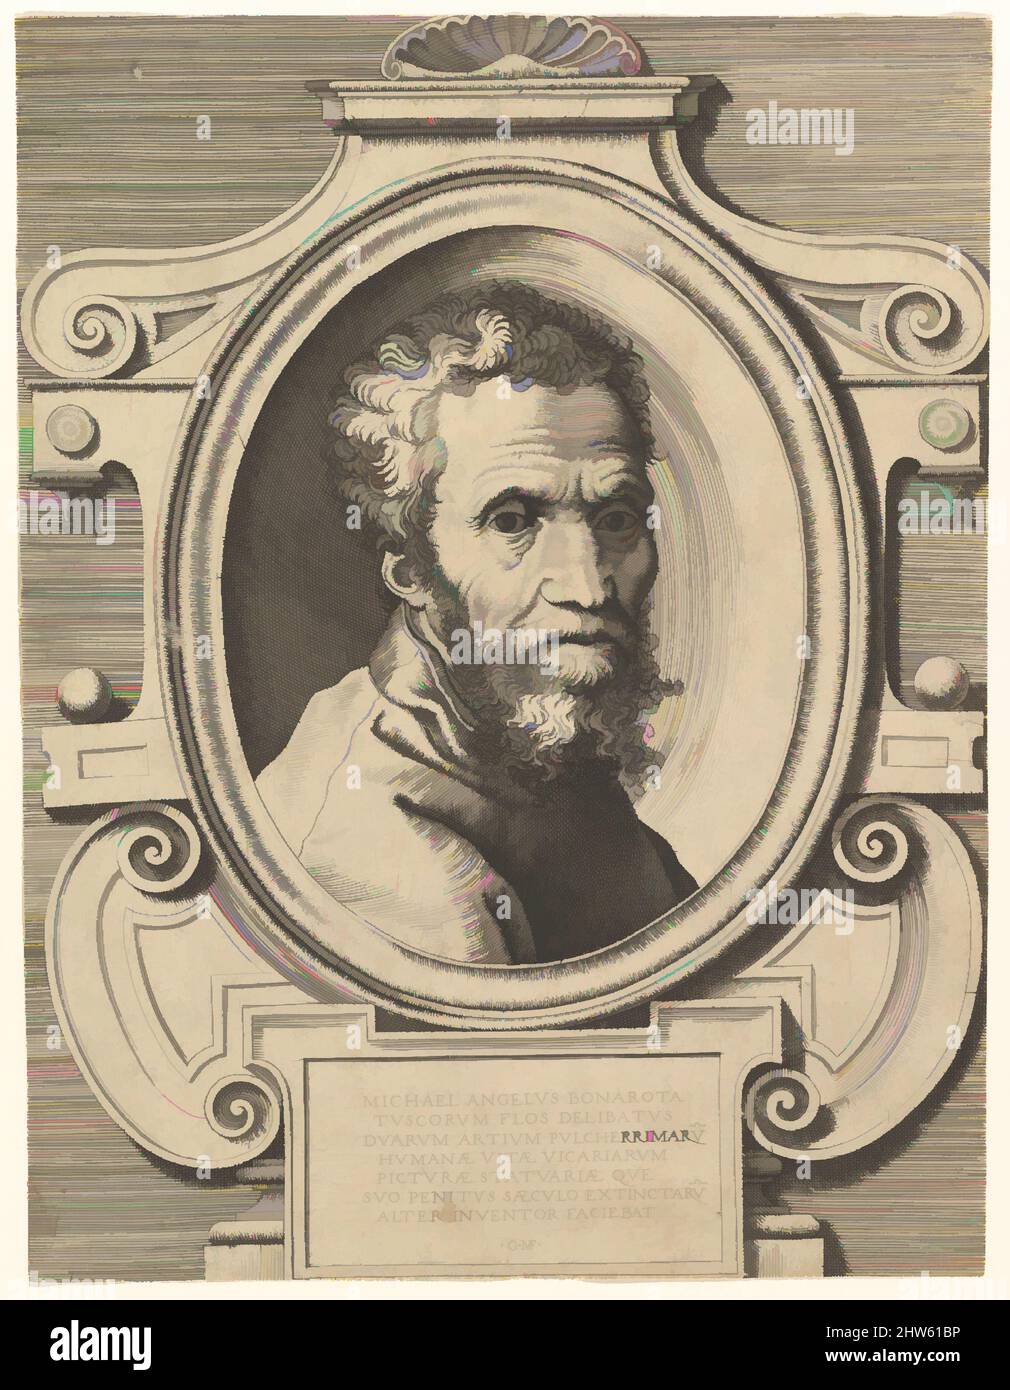 Art inspired by Portrait of Michelangelo, after 1564, Engraving, sheet: 10 3/16 x 7 11/16 in. (25.9 x 19.6 cm) borderline/sheet, Prints, Engraved by Giorgio Ghisi (Italian, Mantua ca. 1520–1582 Mantua), After painting by Marcello Venusti (Italian, Mazzo di Valtellina (Sondrio) ca. 1512, Classic works modernized by Artotop with a splash of modernity. Shapes, color and value, eye-catching visual impact on art. Emotions through freedom of artworks in a contemporary way. A timeless message pursuing a wildly creative new direction. Artists turning to the digital medium and creating the Artotop NFT Stock Photo